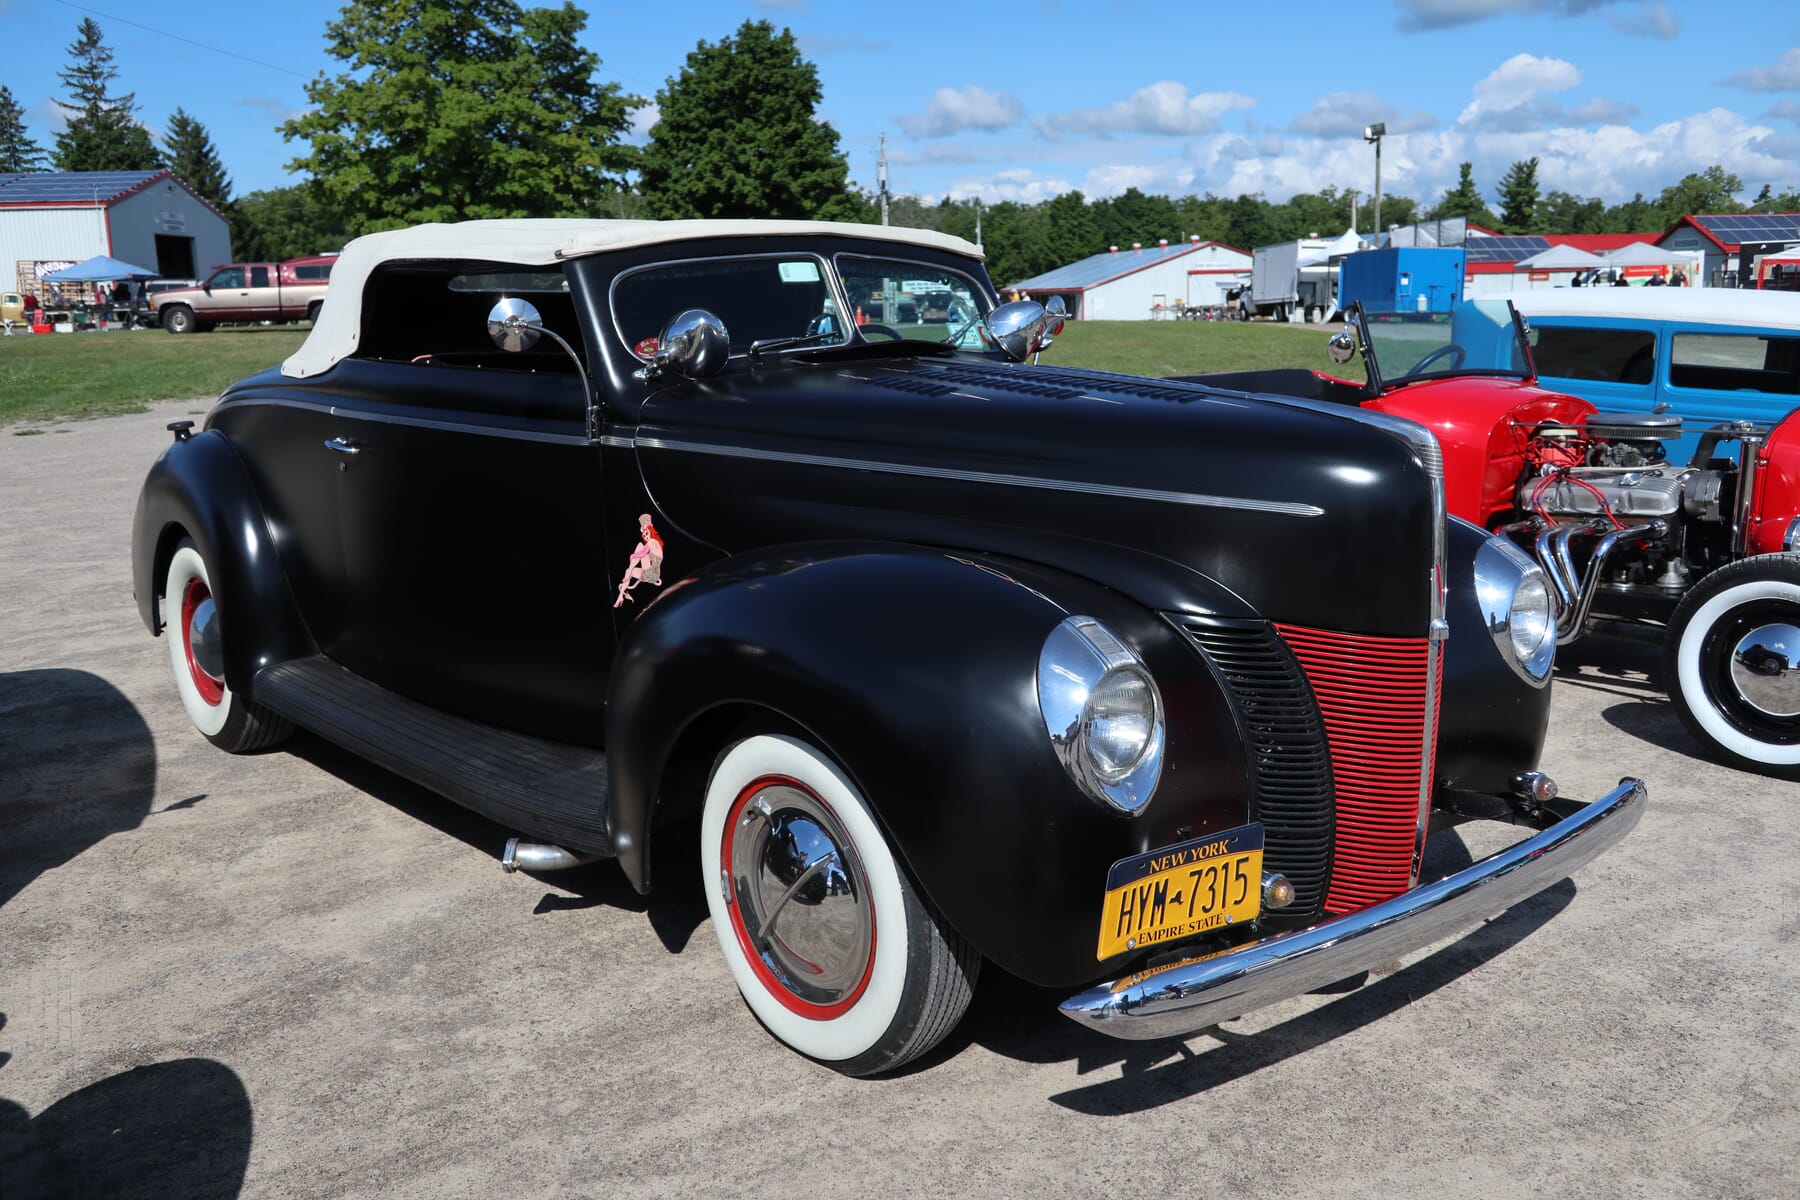 1939 Ford with a 1958 Cadillac 365-cid engine boasting flat back paint and whitewall tires from New York